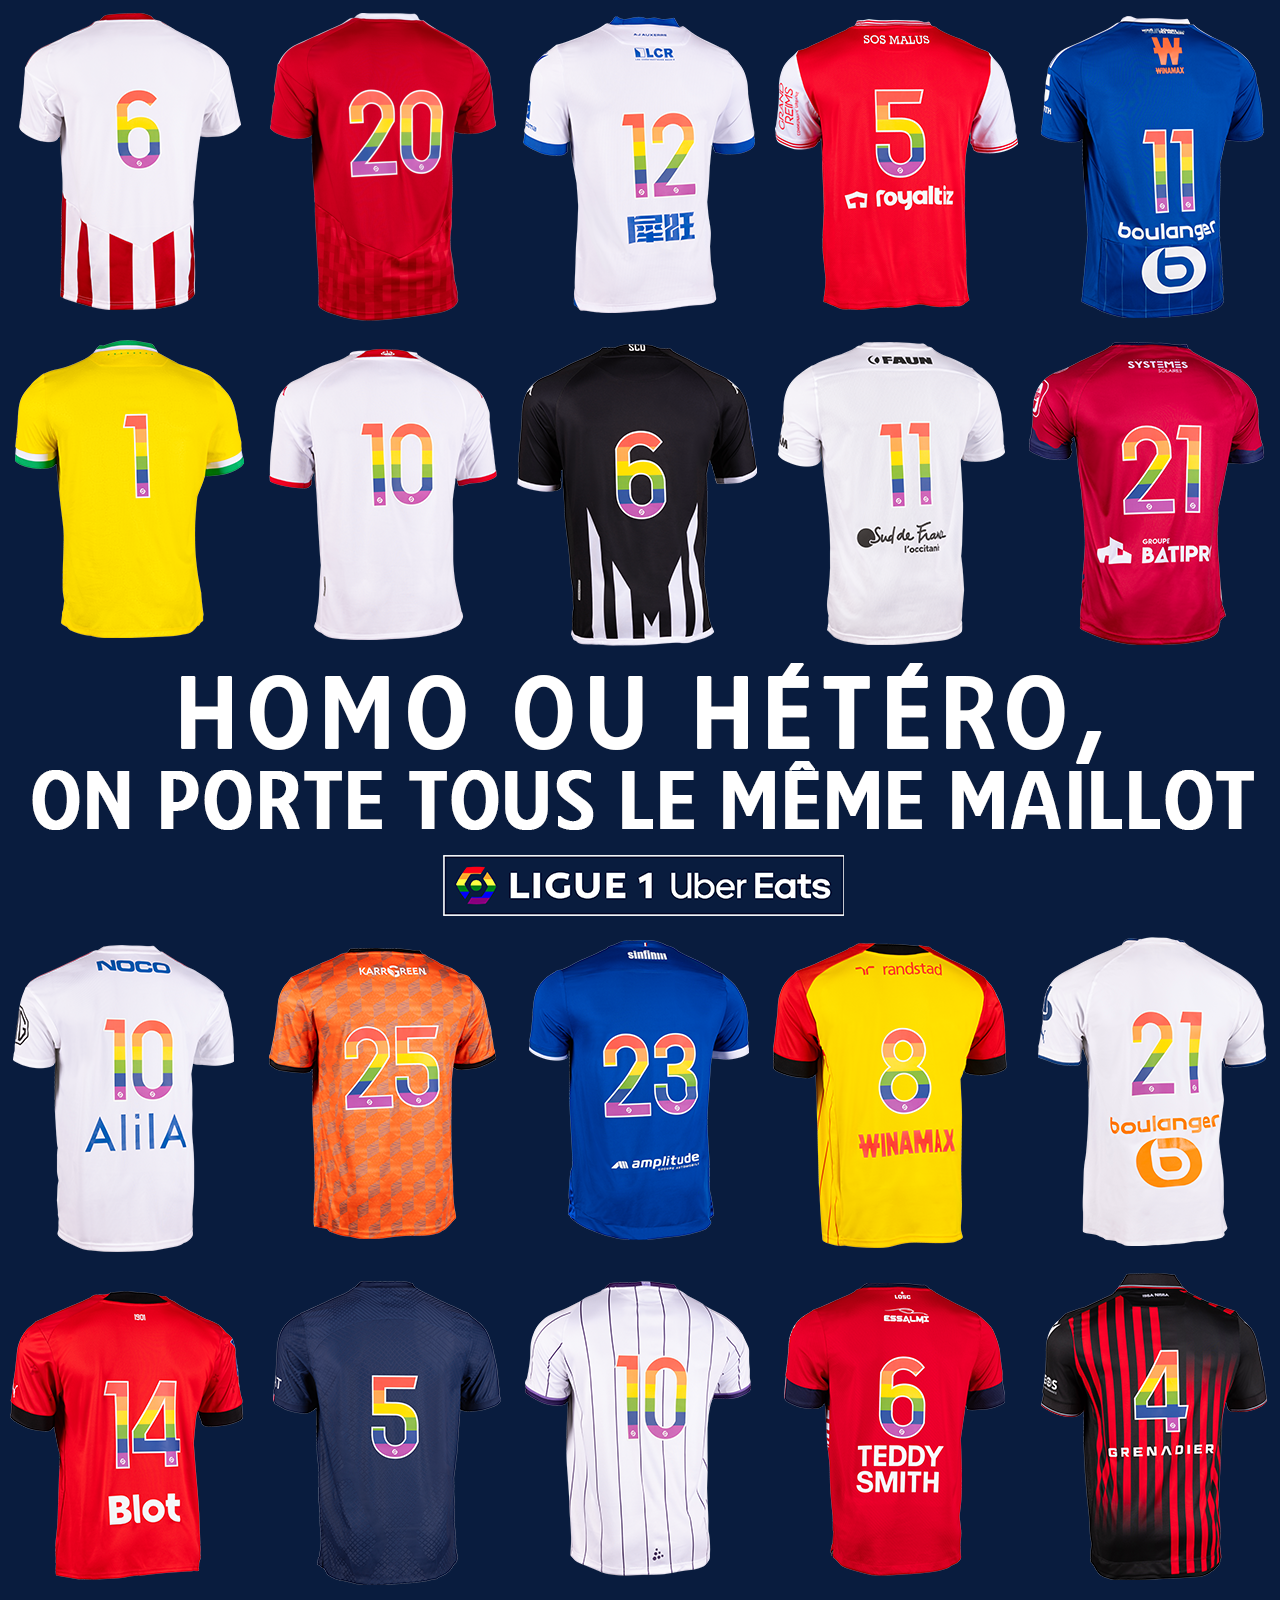 HOMOPHOBIE-20-MAILLOTS-L1-FEED